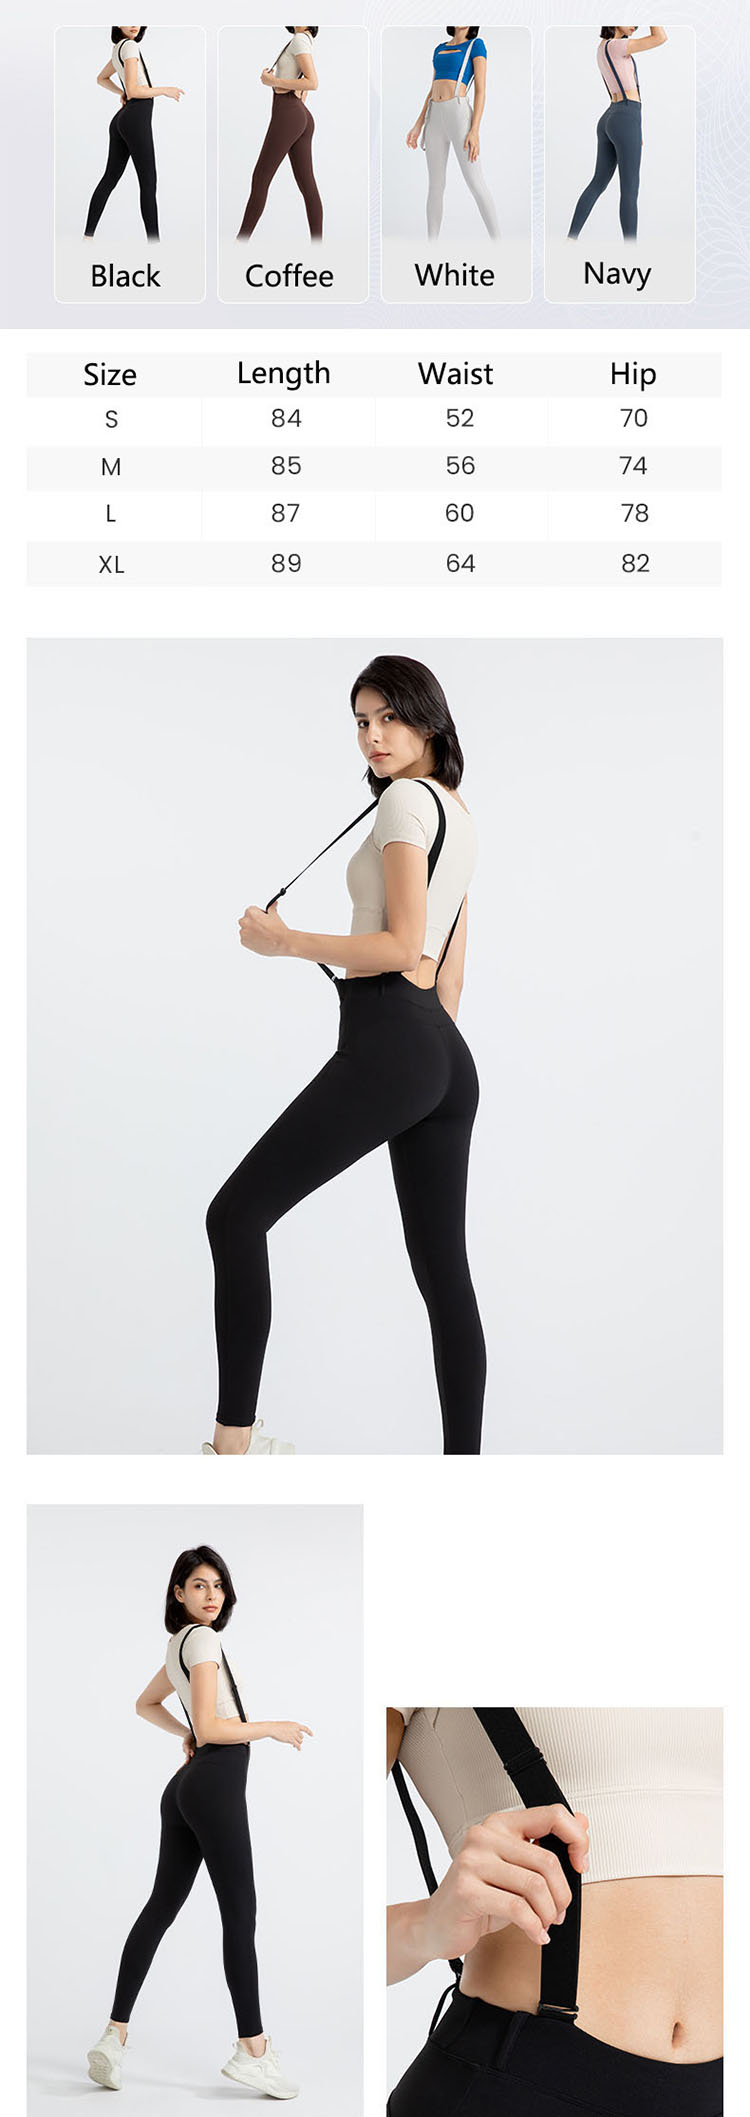 When designing best workout pants to hide cellulite